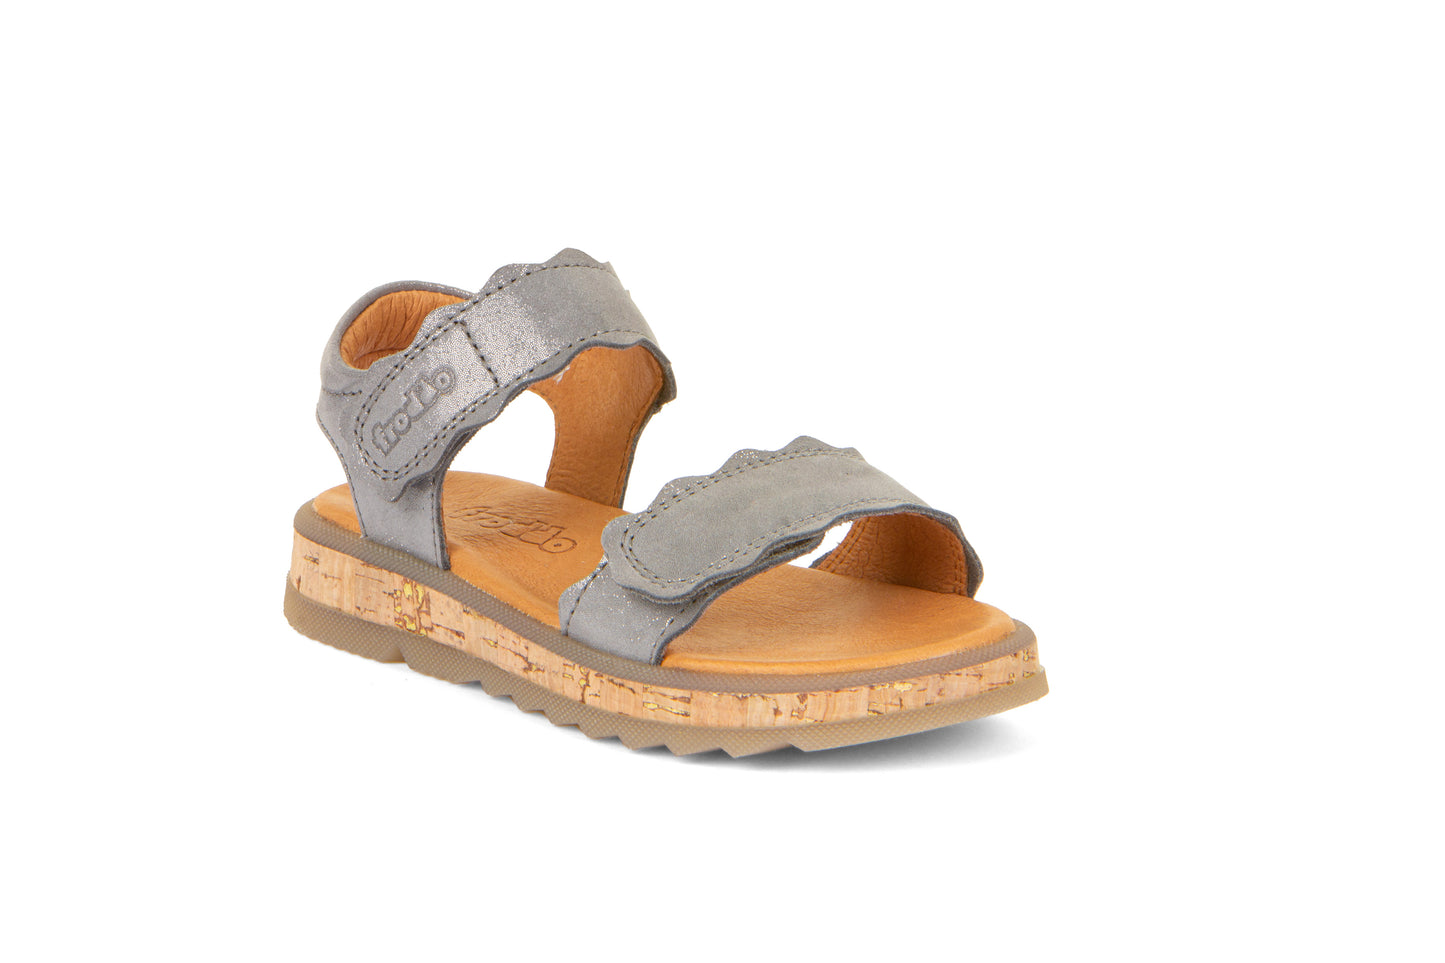 A girls open toe sandal by Froddo, style Alana G3150253-7, in silver leather set on cork effect sole unit with velcro fastening. Angled view.